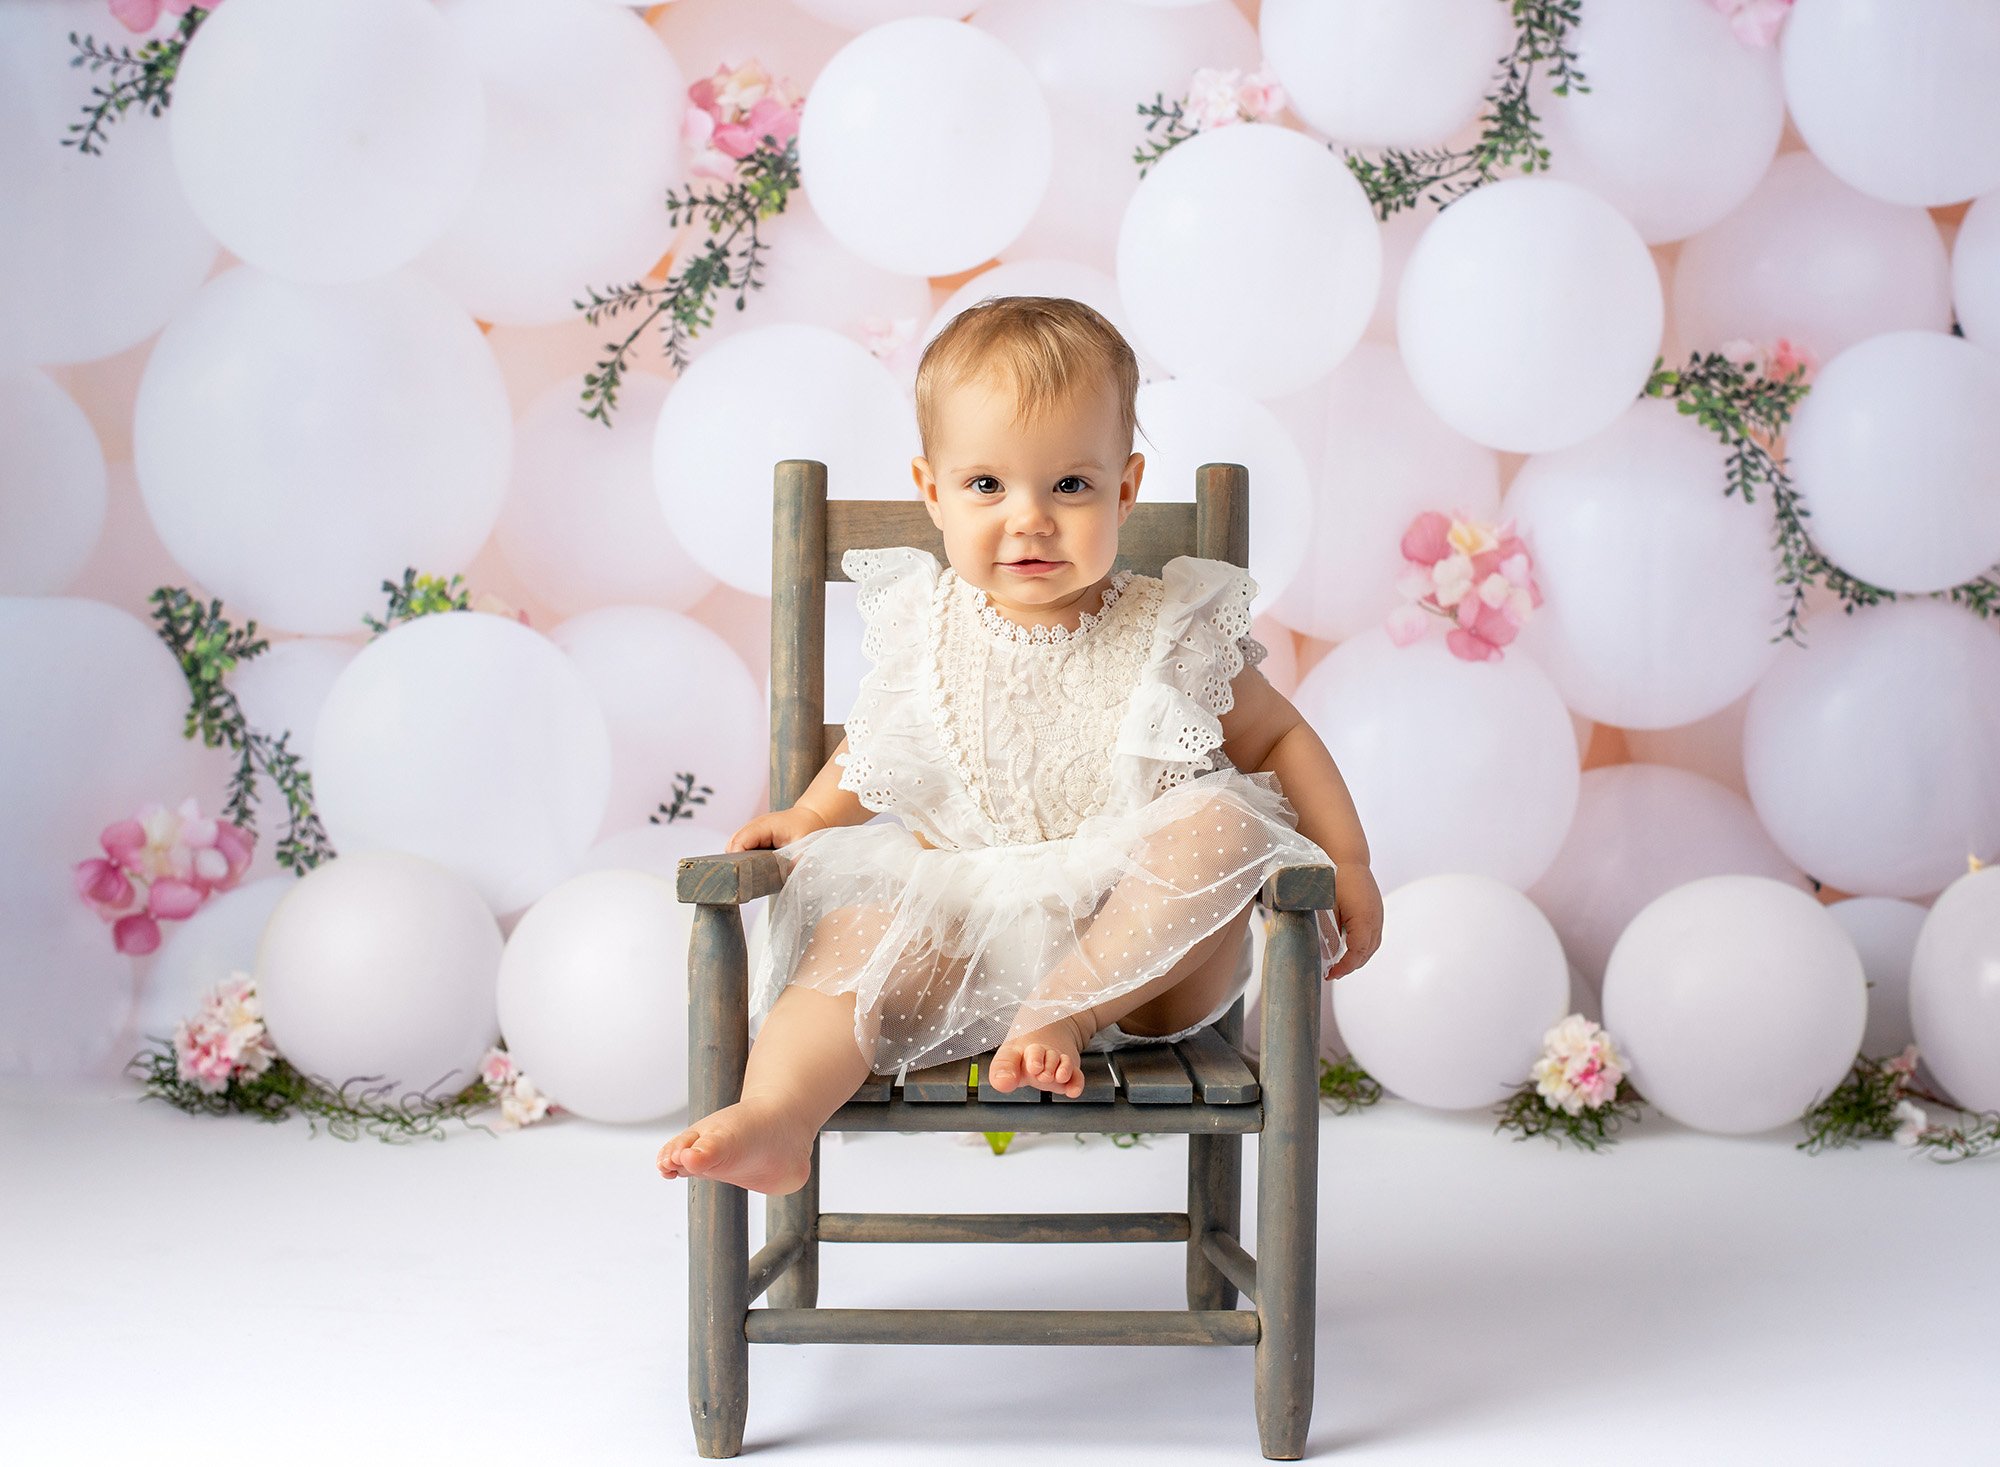 1 year baby photoshoot brown eyed one year old girl wearing white lace dress sitting on rustic chair with white balloons in background